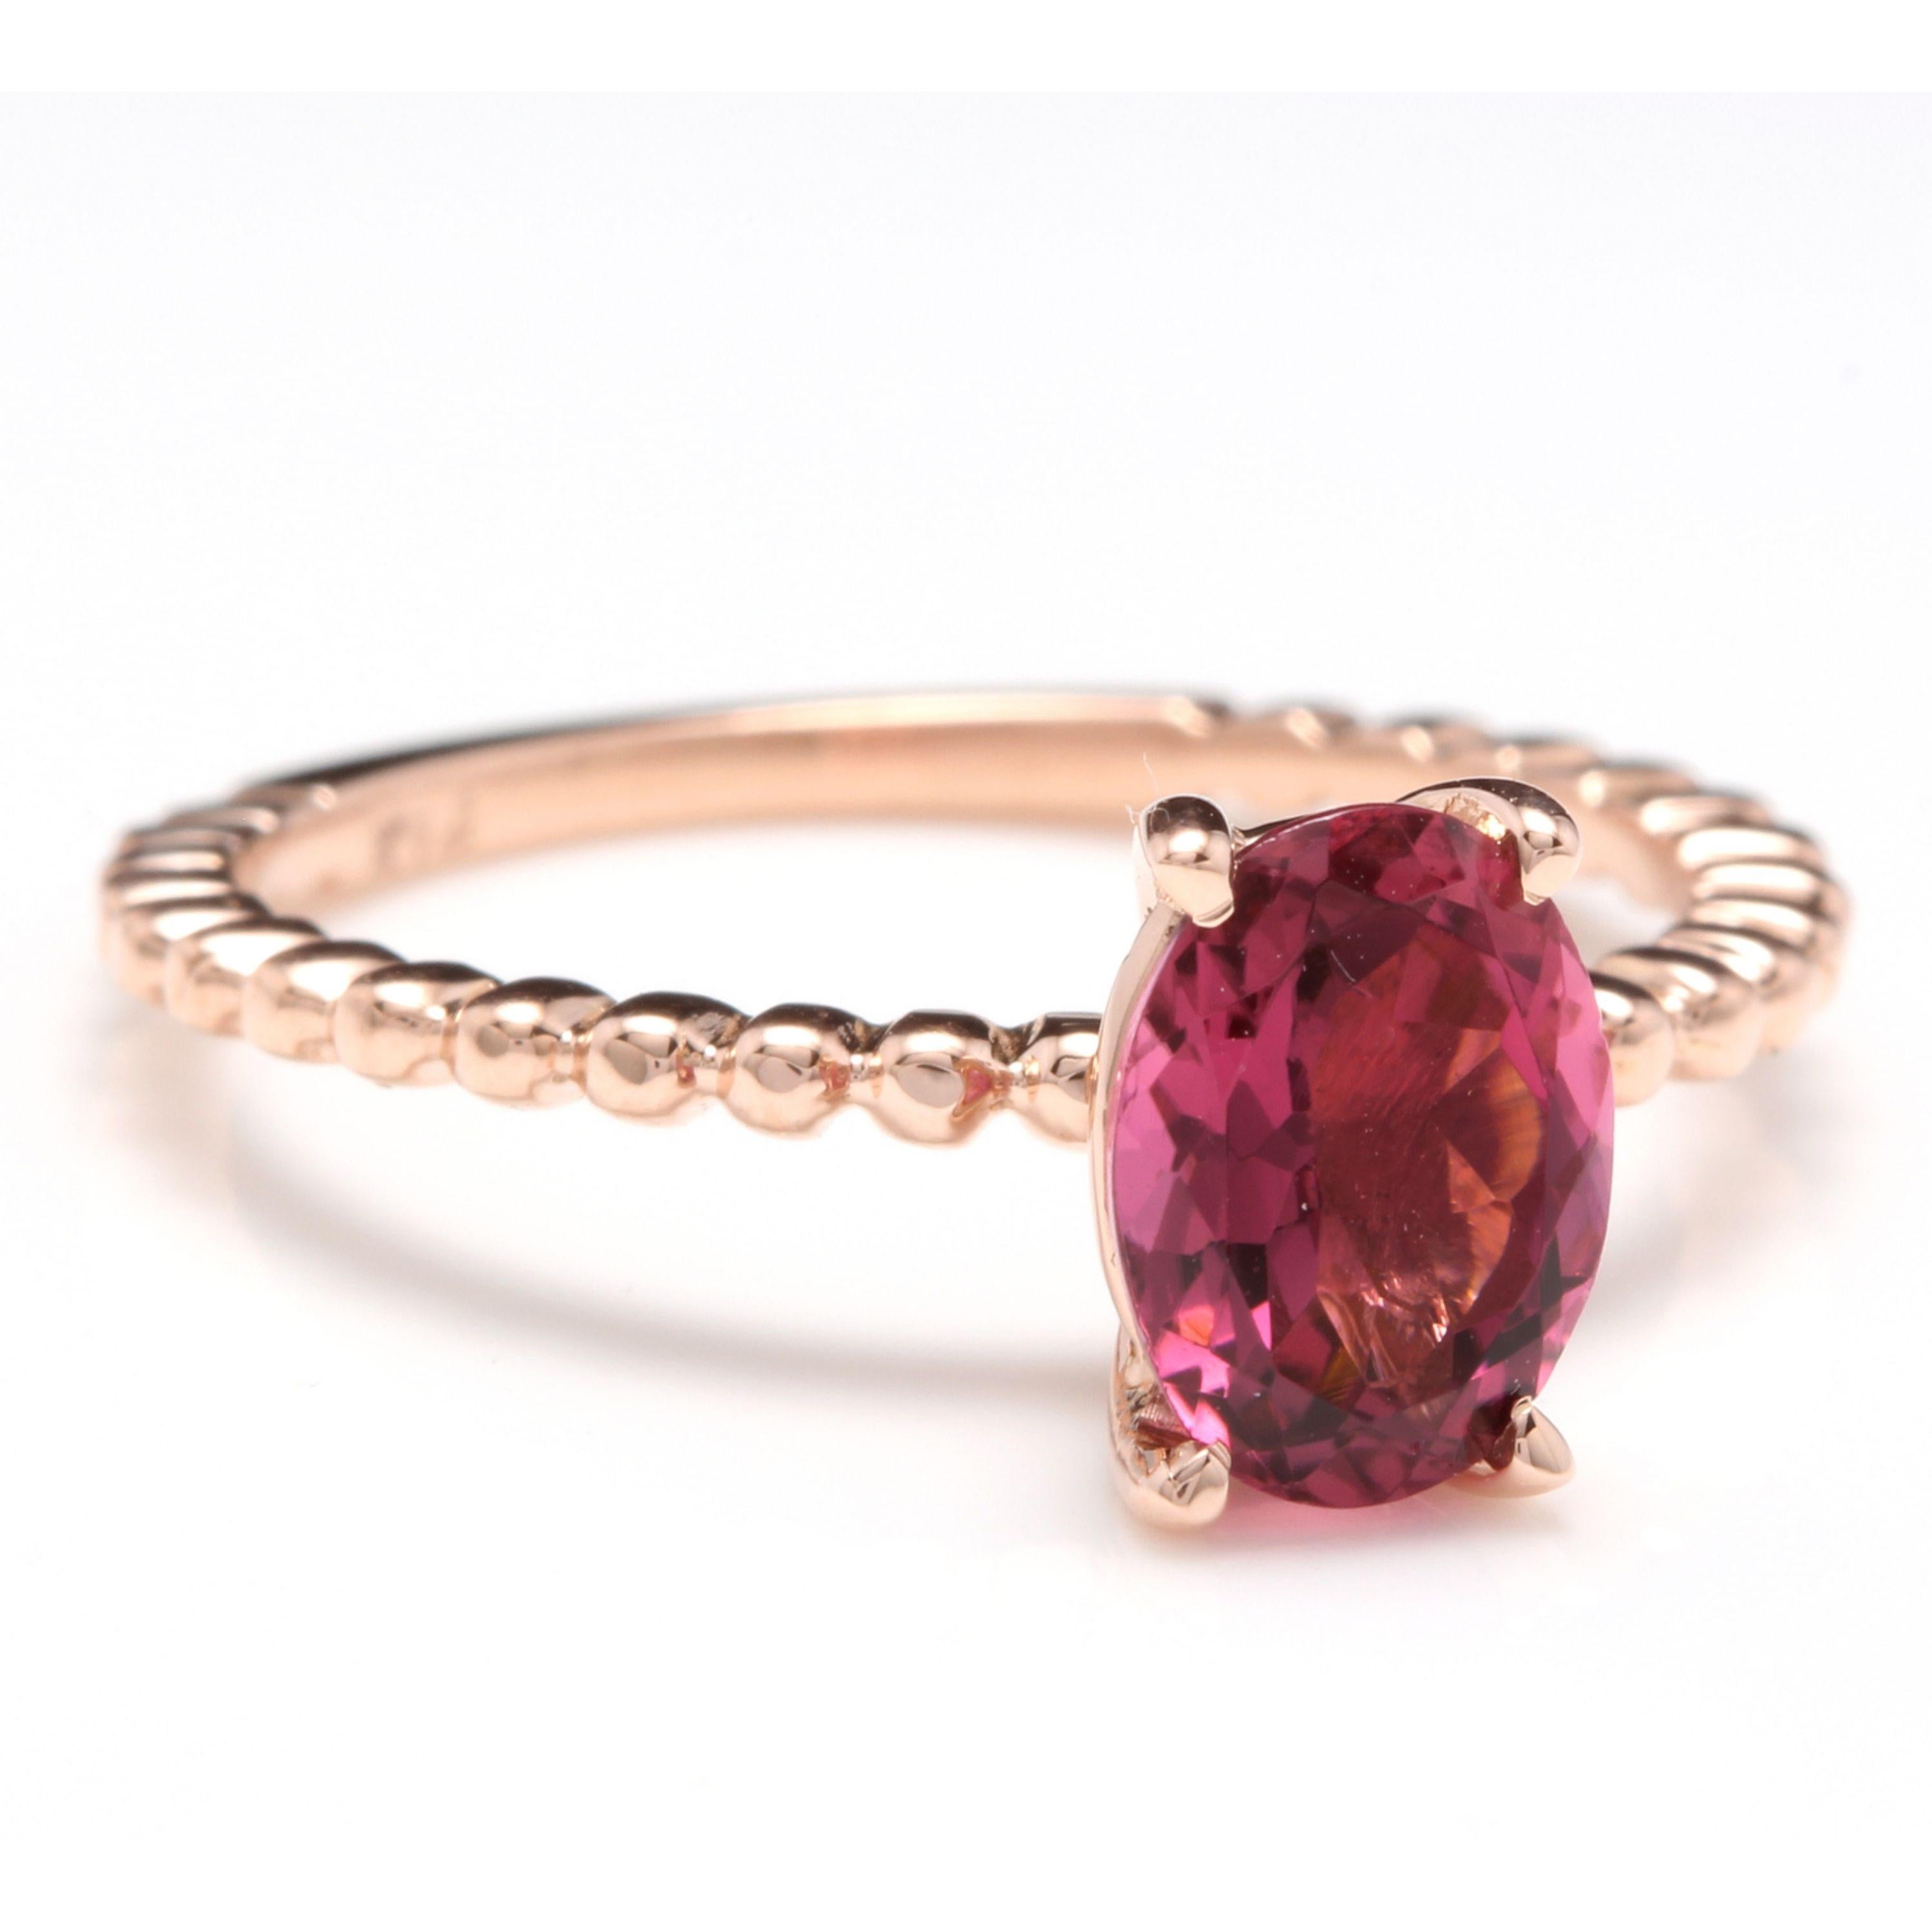 1.40 Carats Exquisite Natural Tourmaline 14K Solid Rose Gold Ring

Total Natural Tourmaline Weight is: Approx. 1.40 Carats

Tourmaline Measures: Approx. 8.00 x 6.00mm

Tourmaline Treatment: Heating

Ring size: 7 (we offer free re-sizing upon